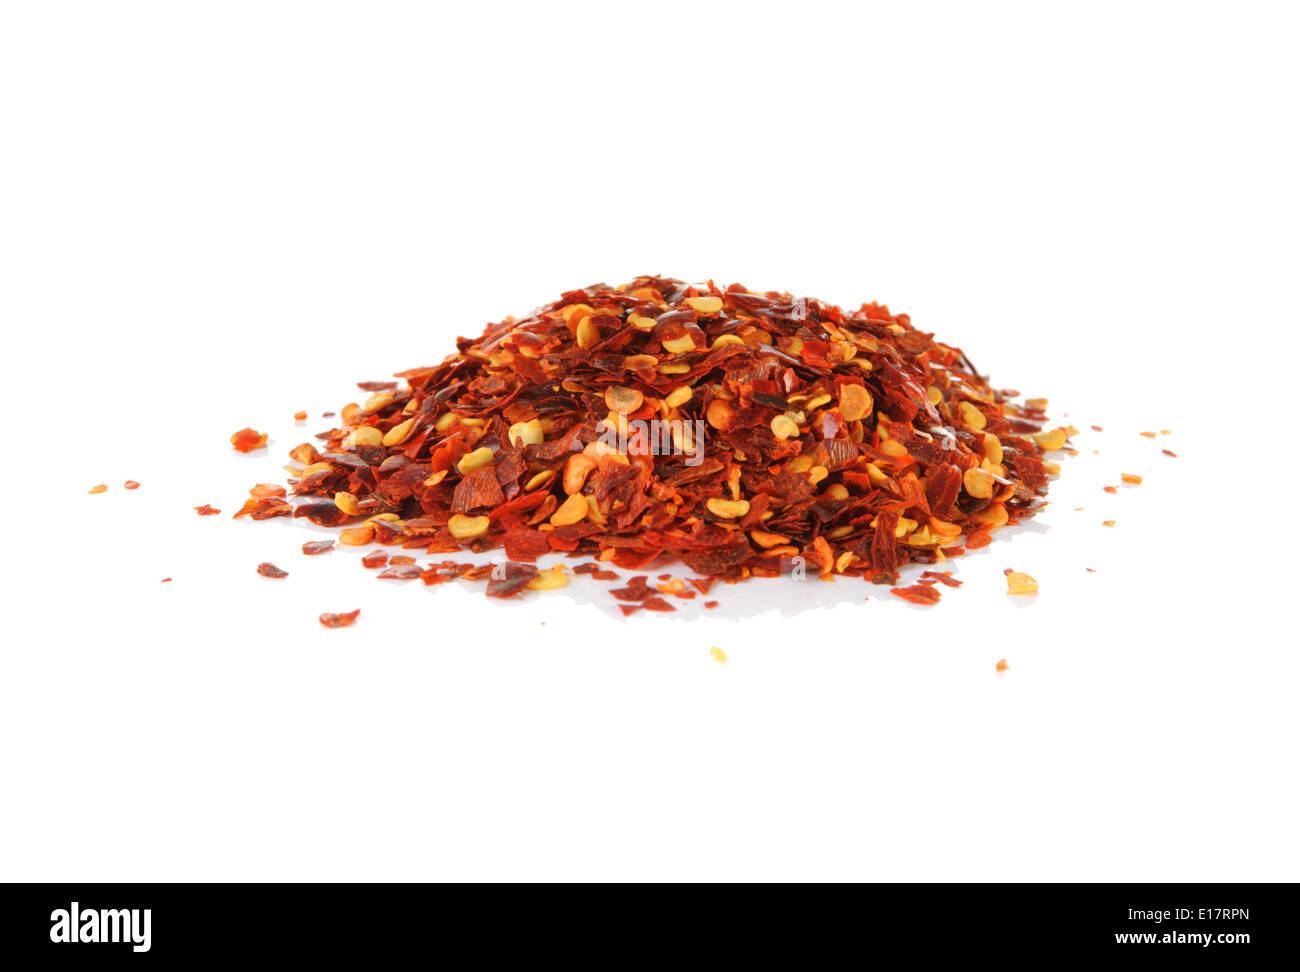 Pile of red pepper flakes on a white background Stock Photo